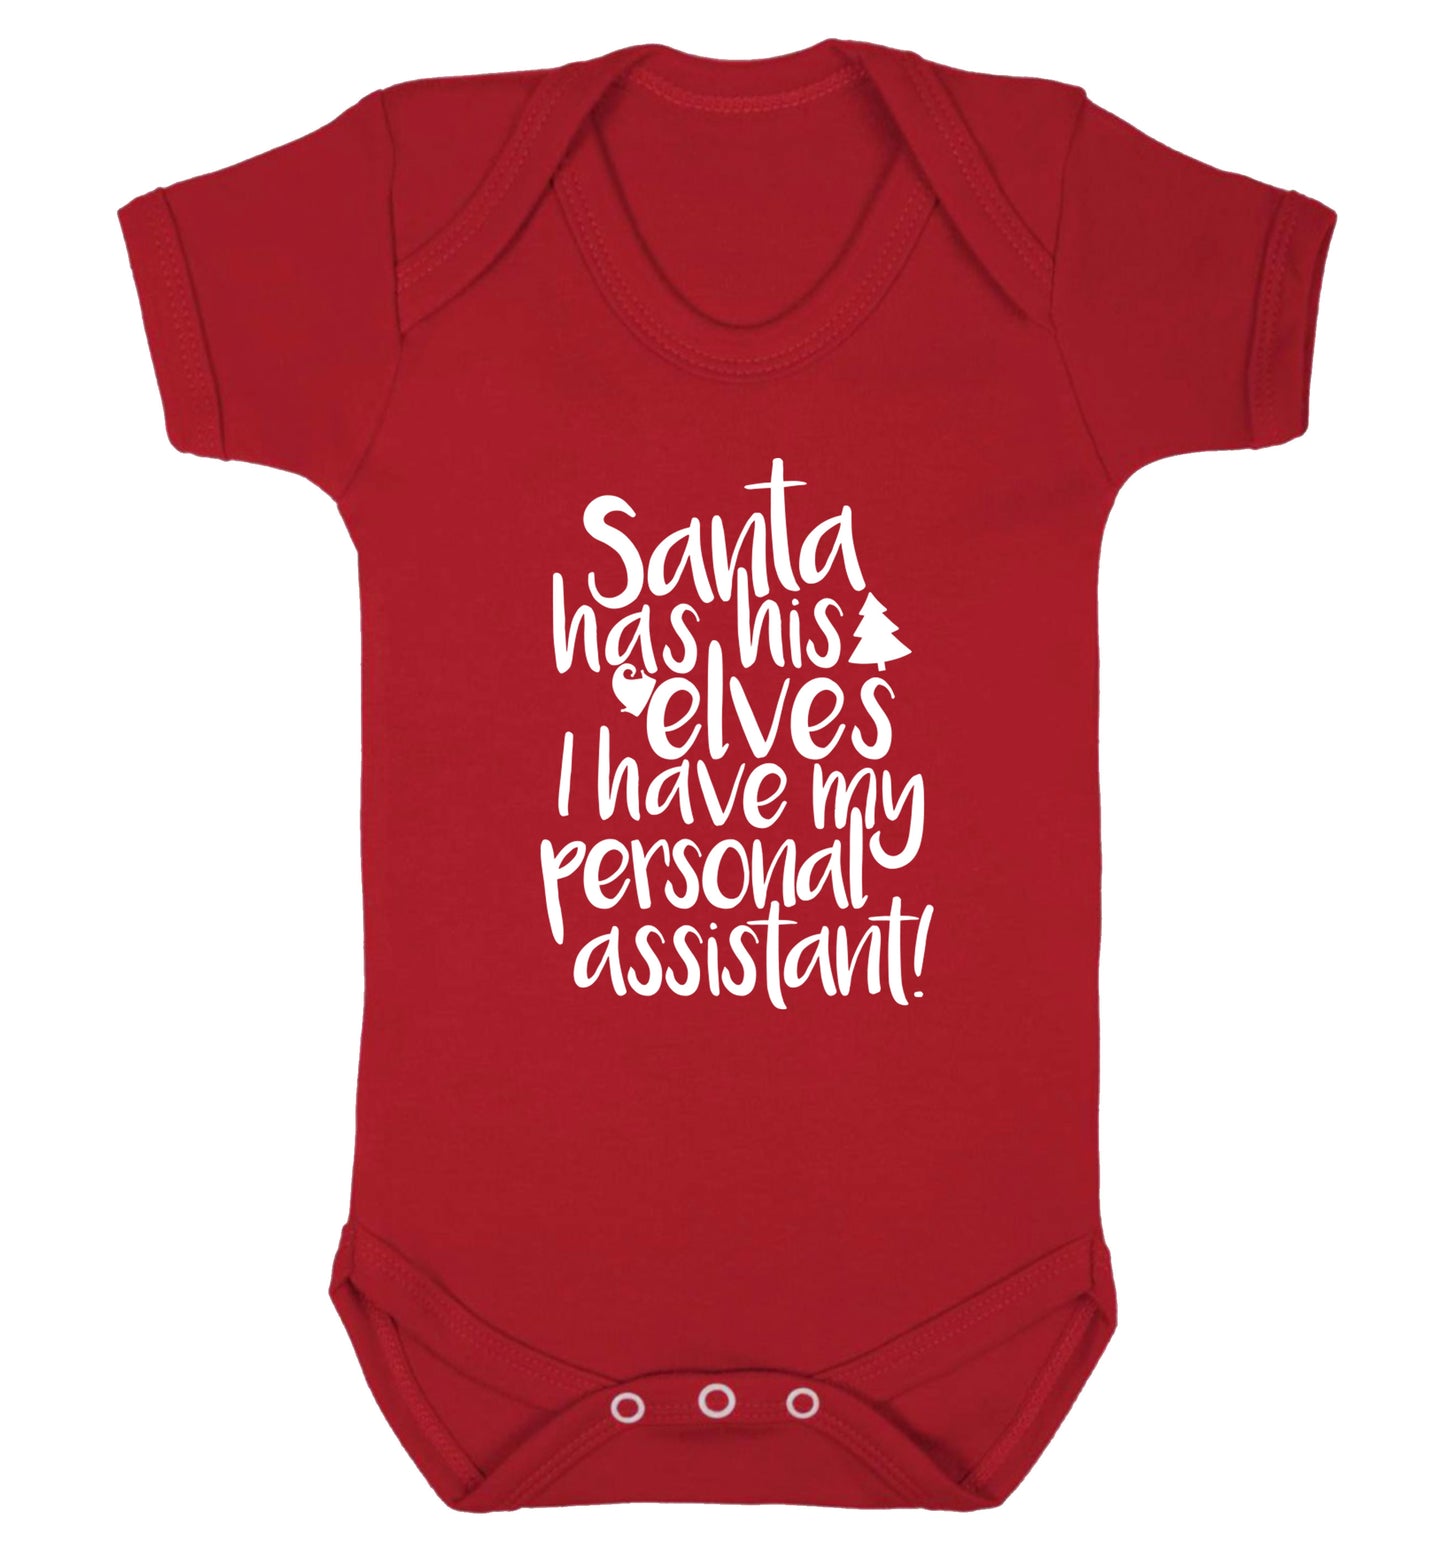 Santa has his elves I have my personal assistant Baby Vest red 18-24 months